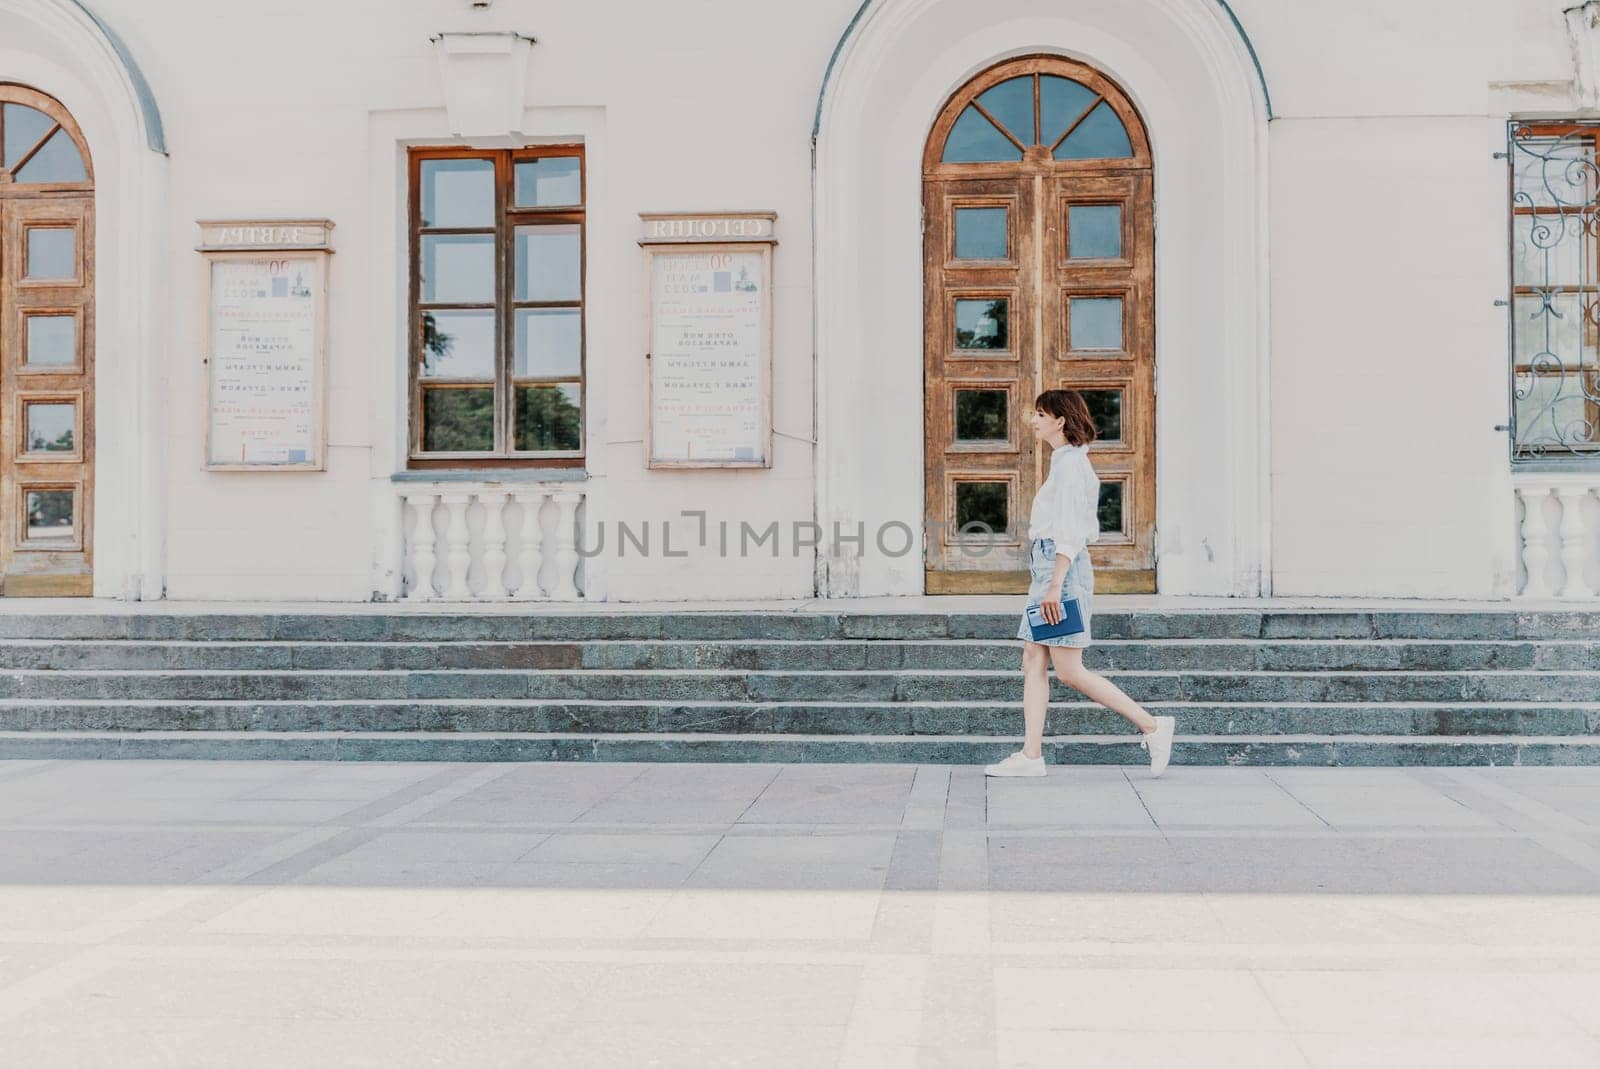 Woman staircase city. A business woman in a white shirt and denim skirt walks down the steps of an ancient building in the city.